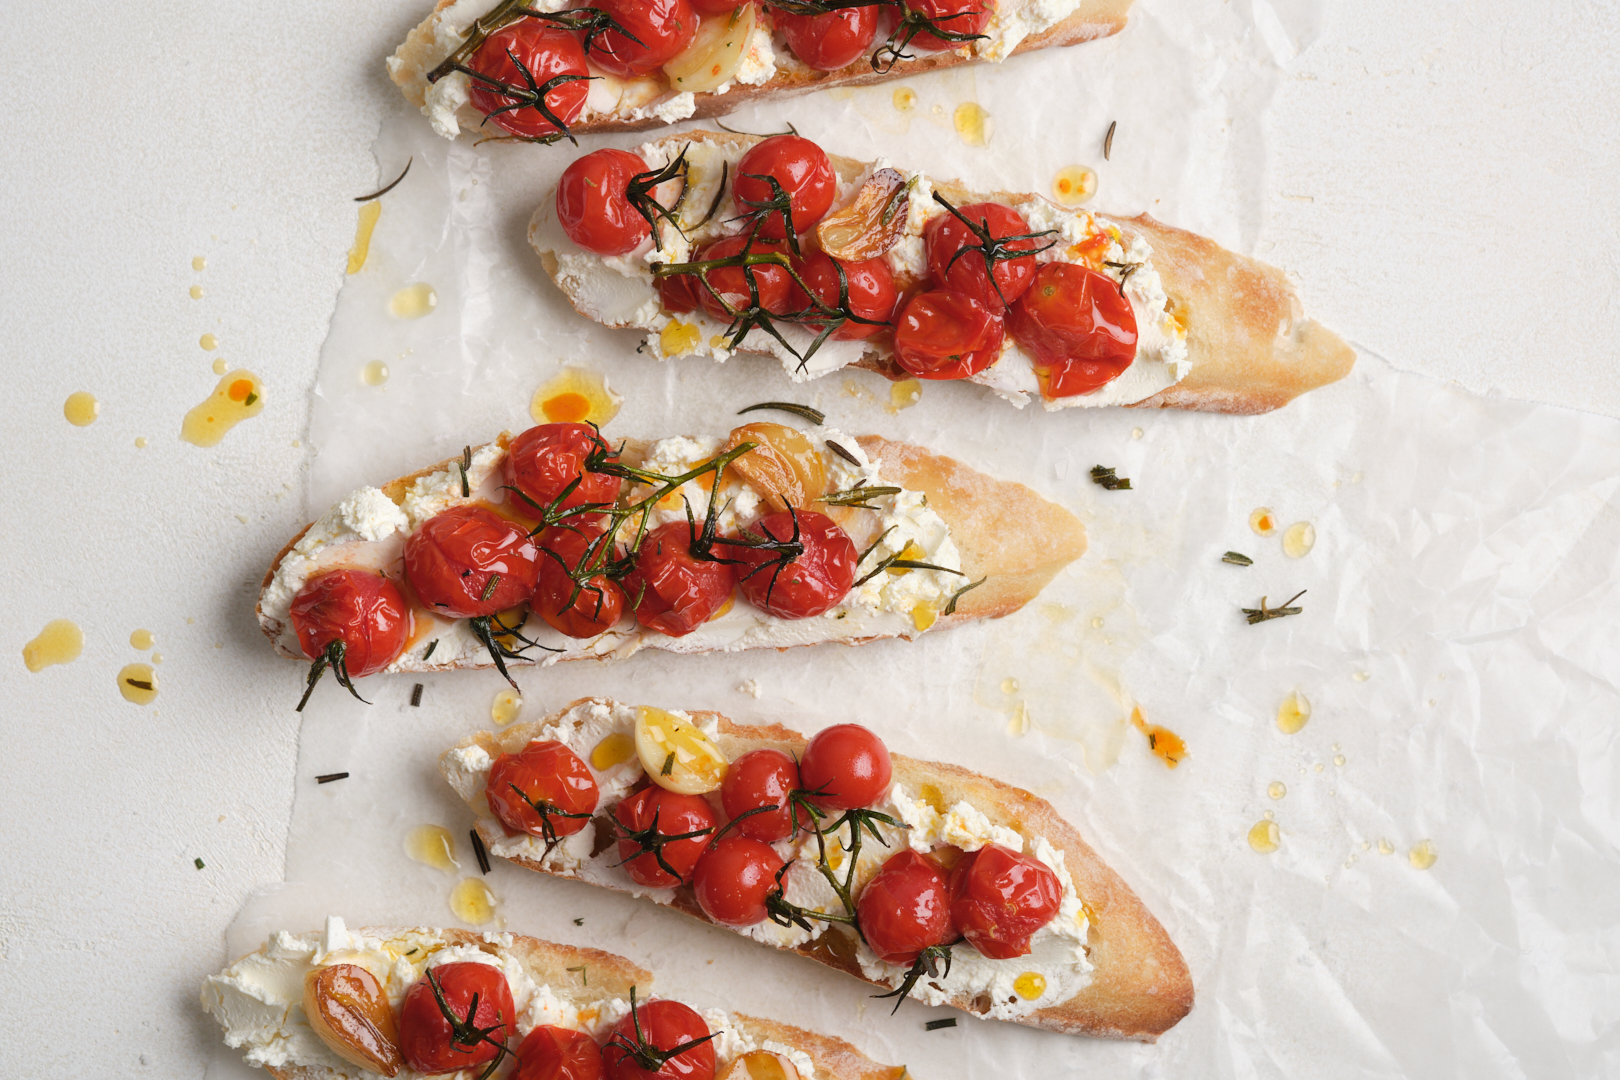 Slices of baguette spread with soft cheese and topped with roasted cherry tomatoes